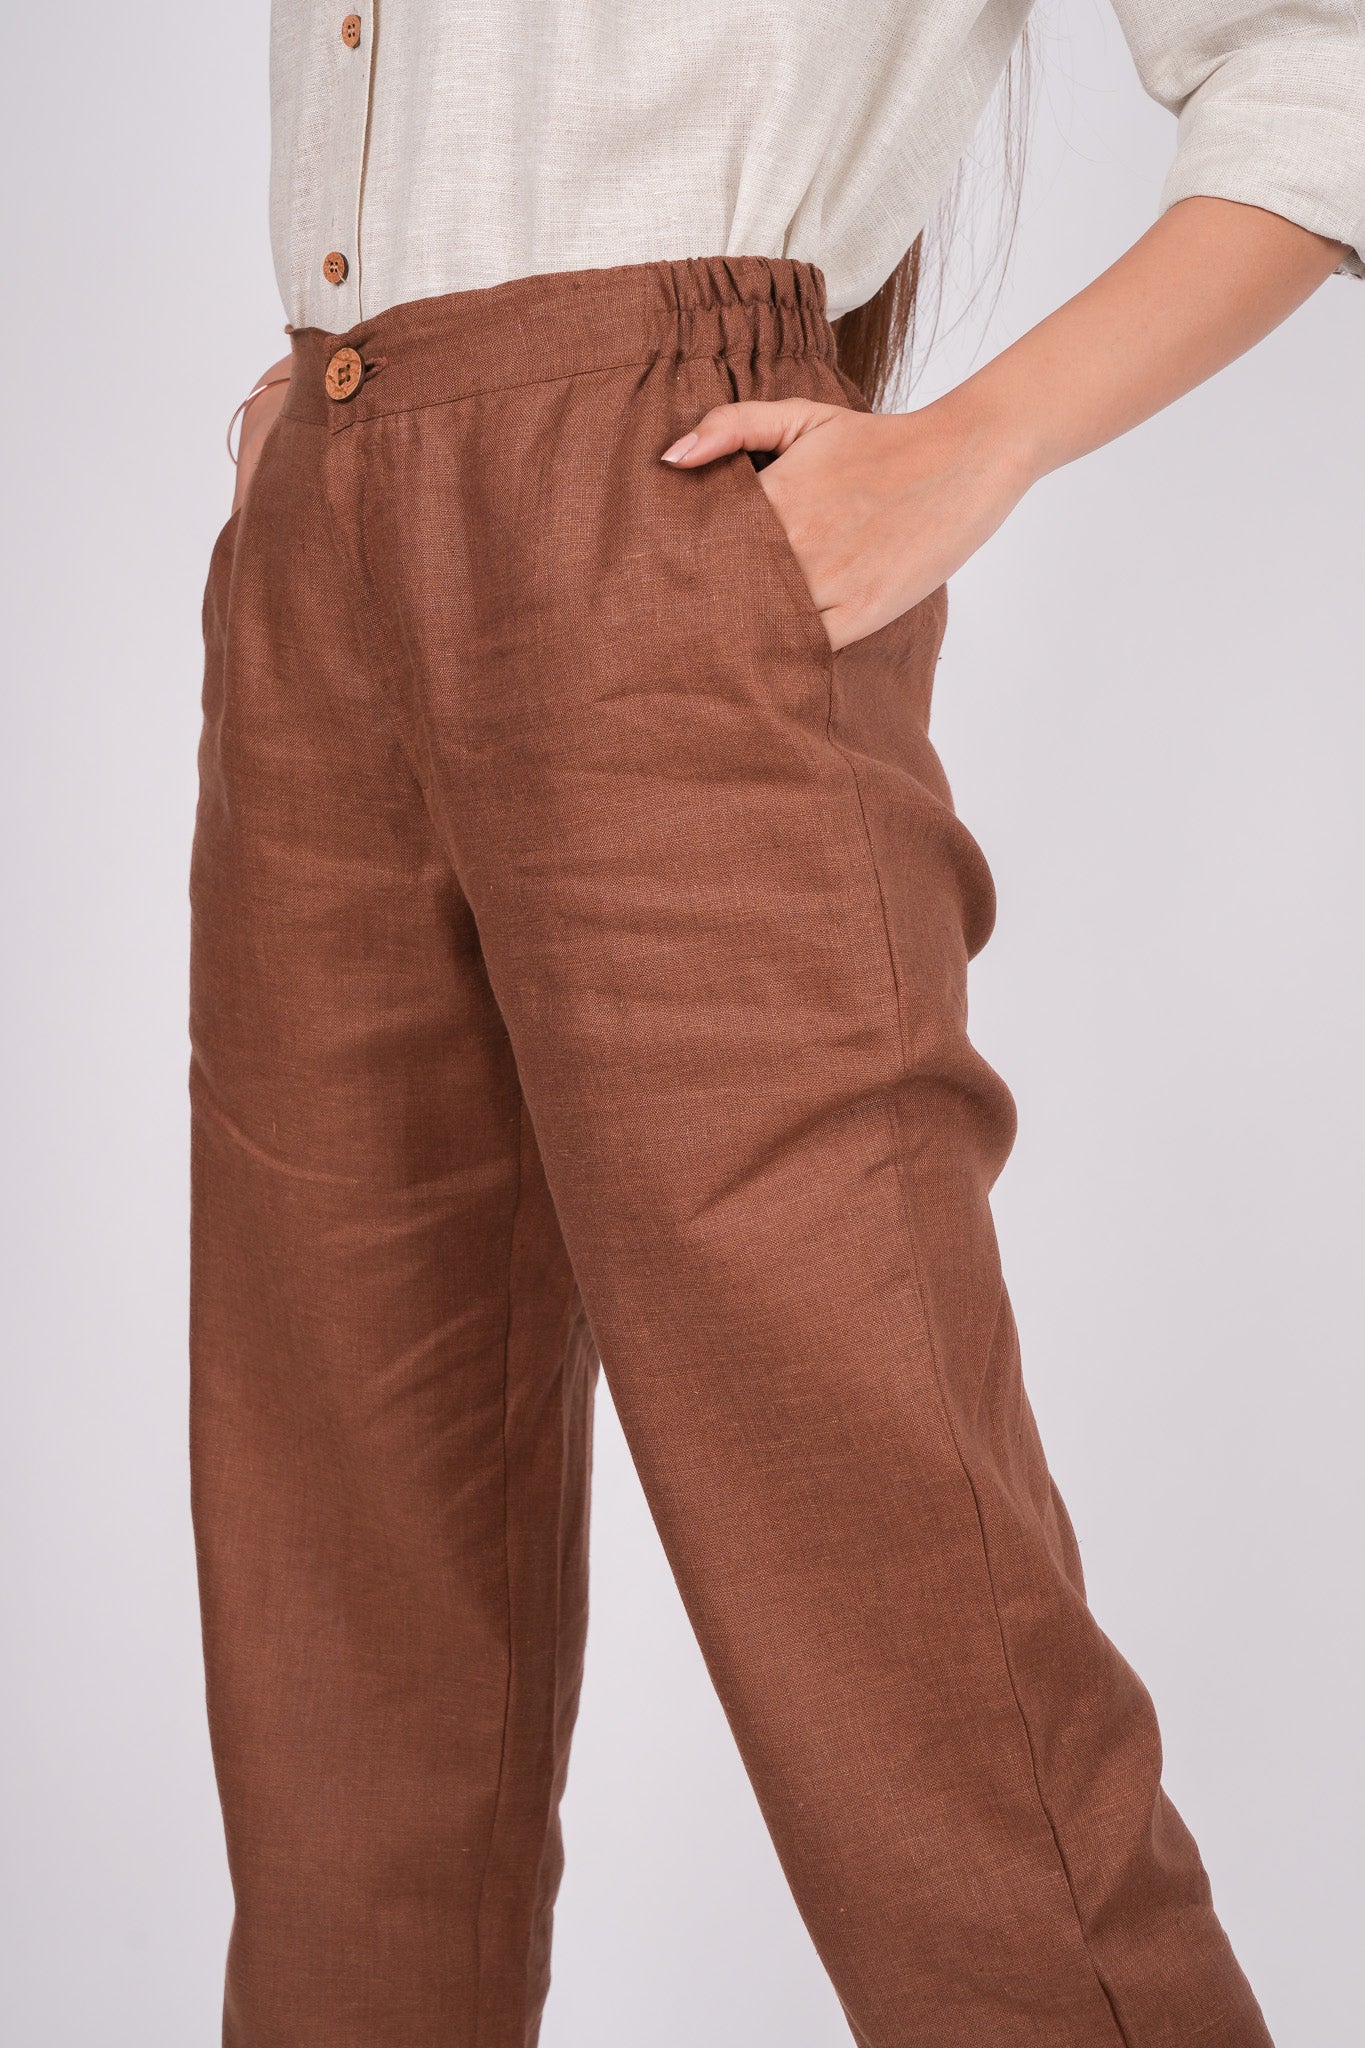 Buy Ladies Slim Chino Flat Front Pant - Edwards Online at Best price - NY